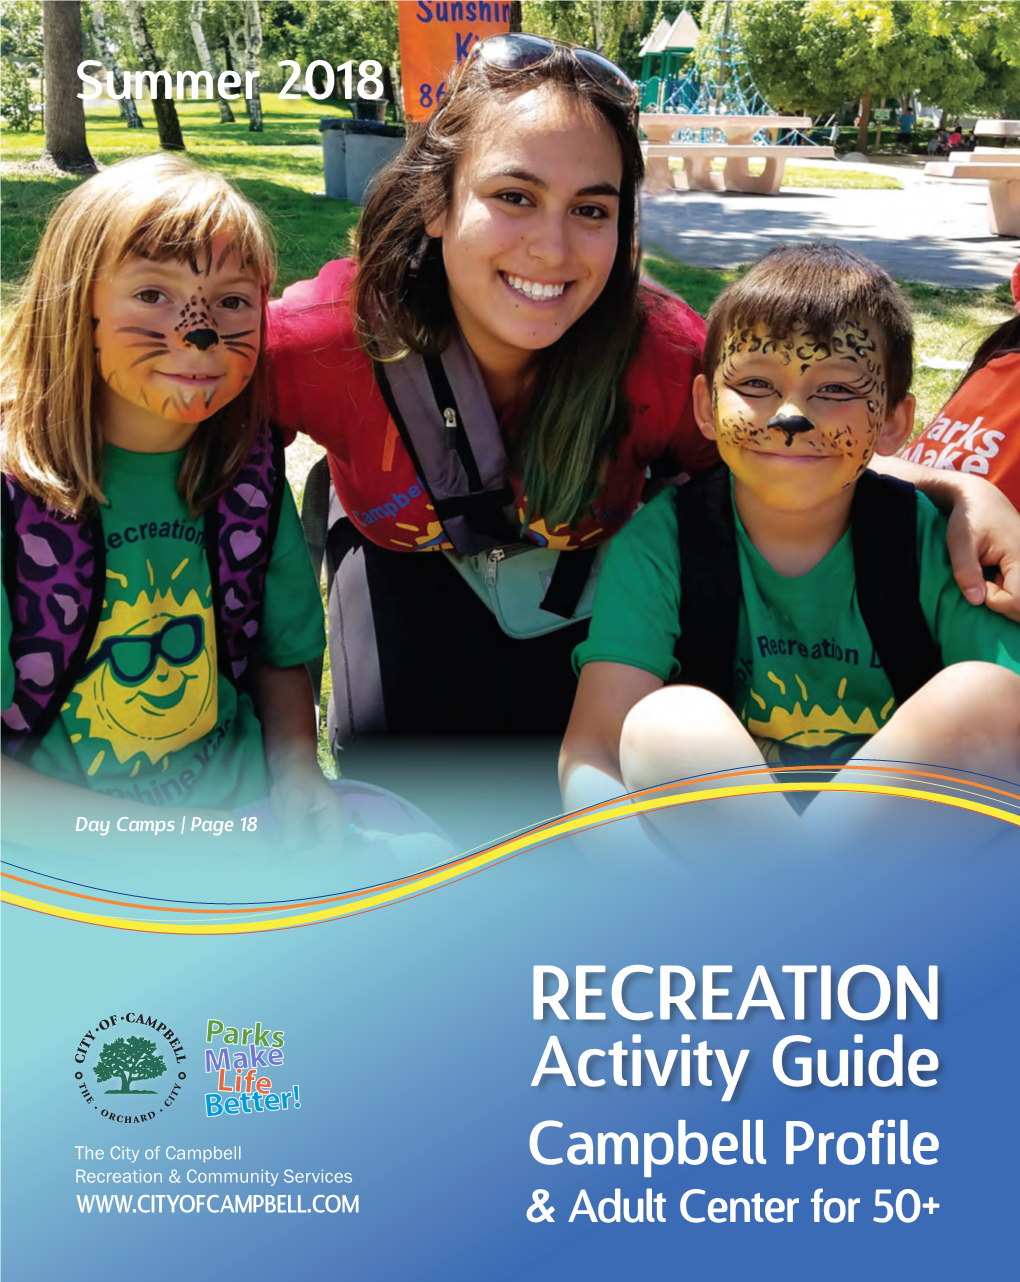 RECREATION Activity Guide